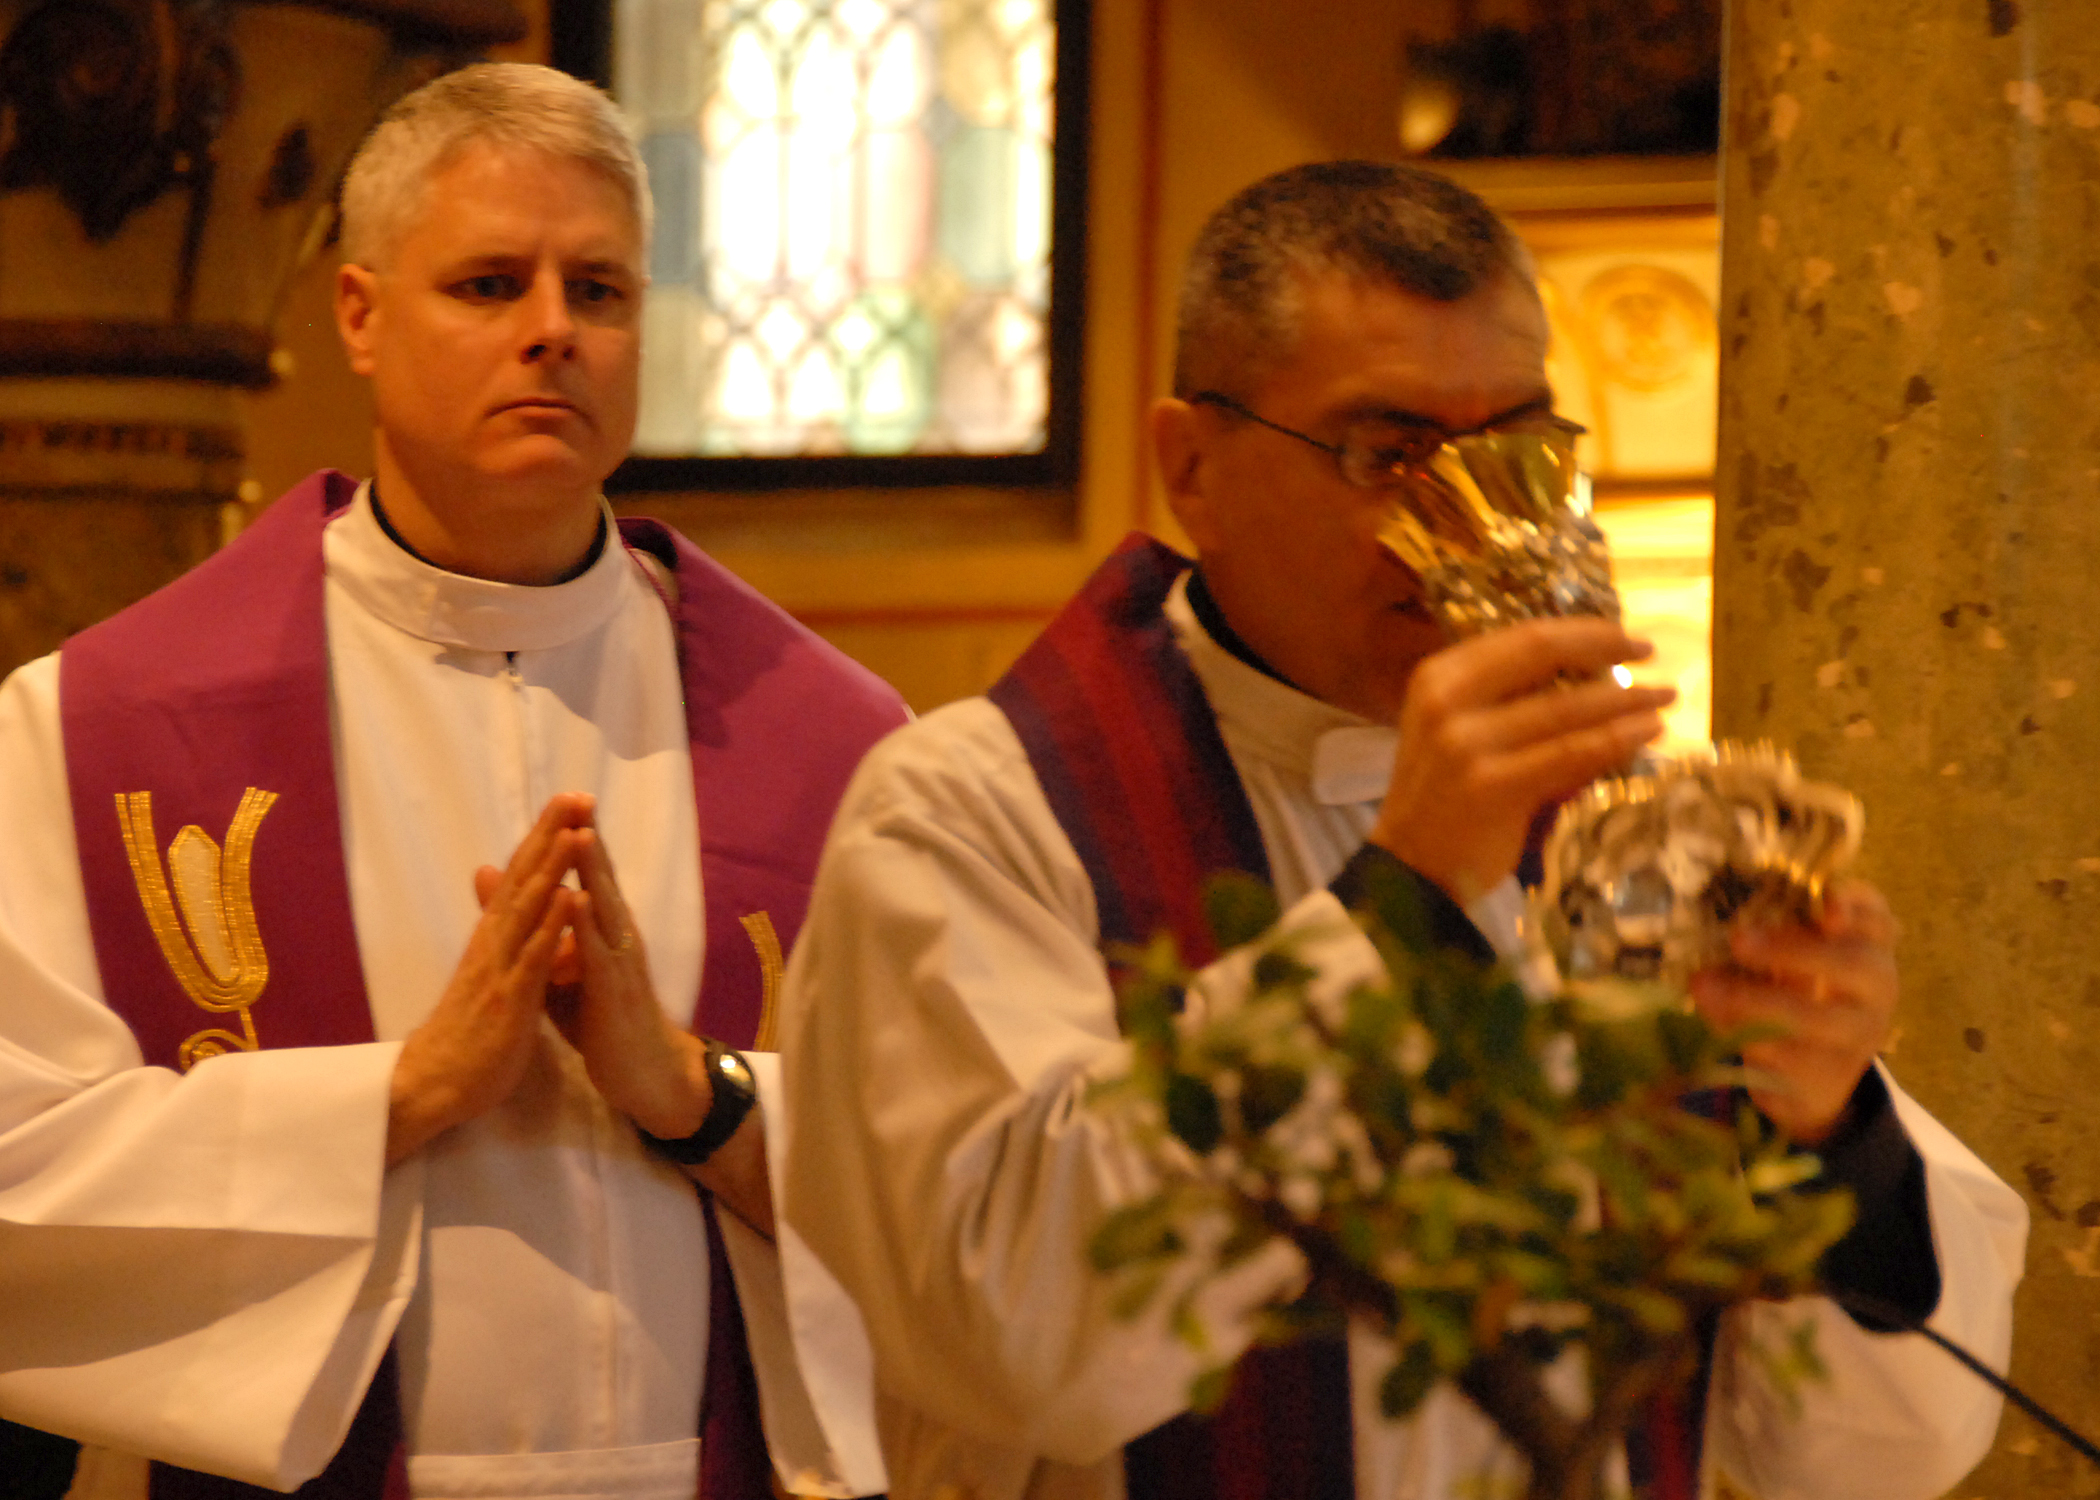 two priests giving each other some chalicee and candles